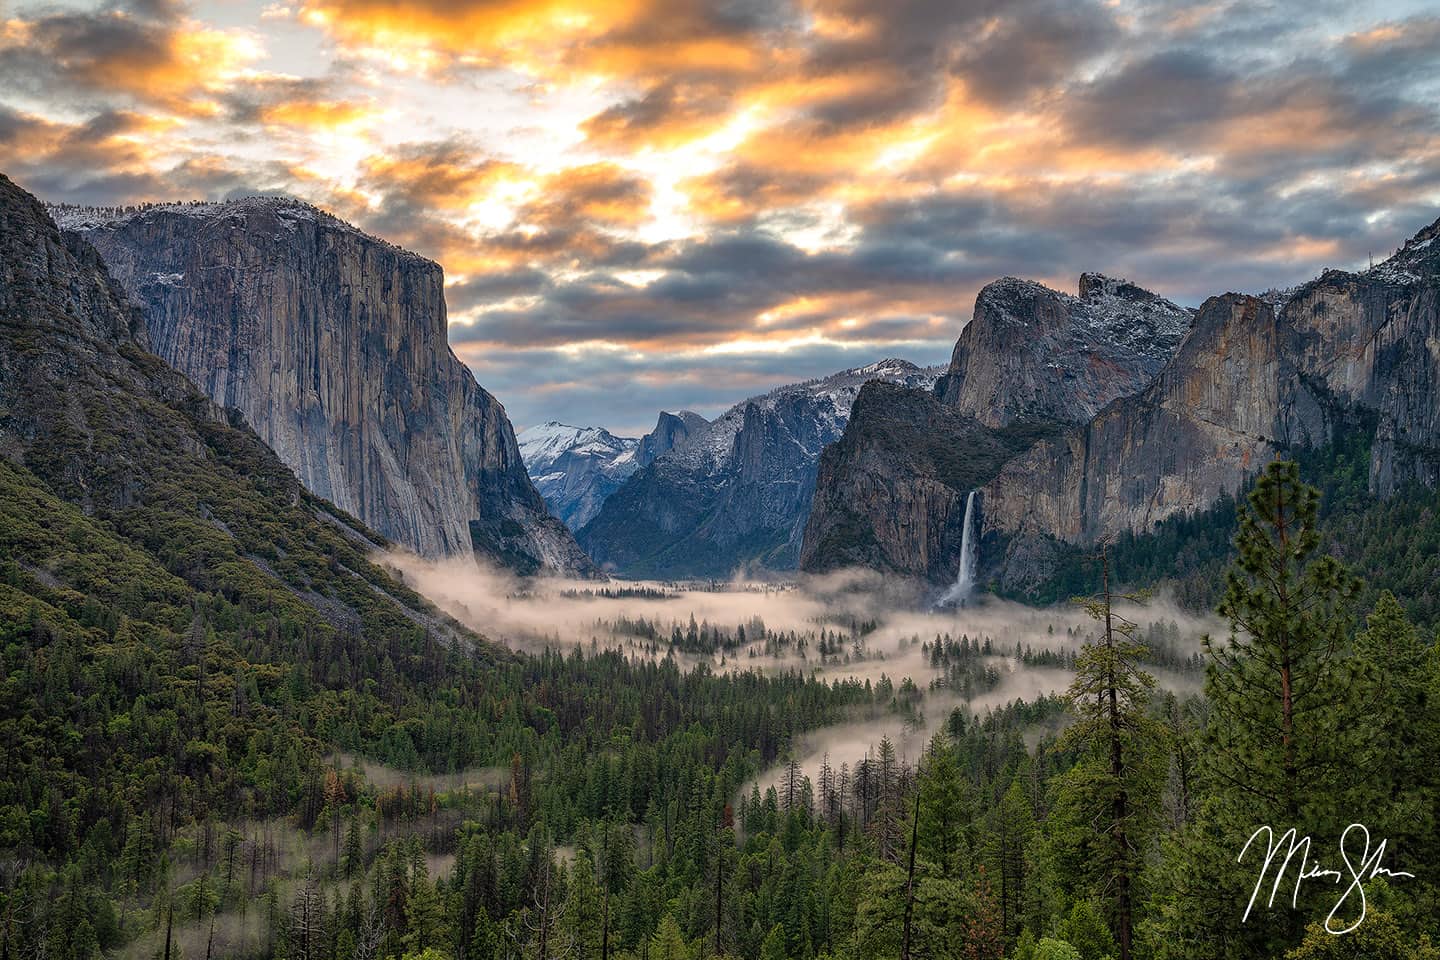 Sunrise at Tunnel View - Tunnel View, Yosemite National Park, California